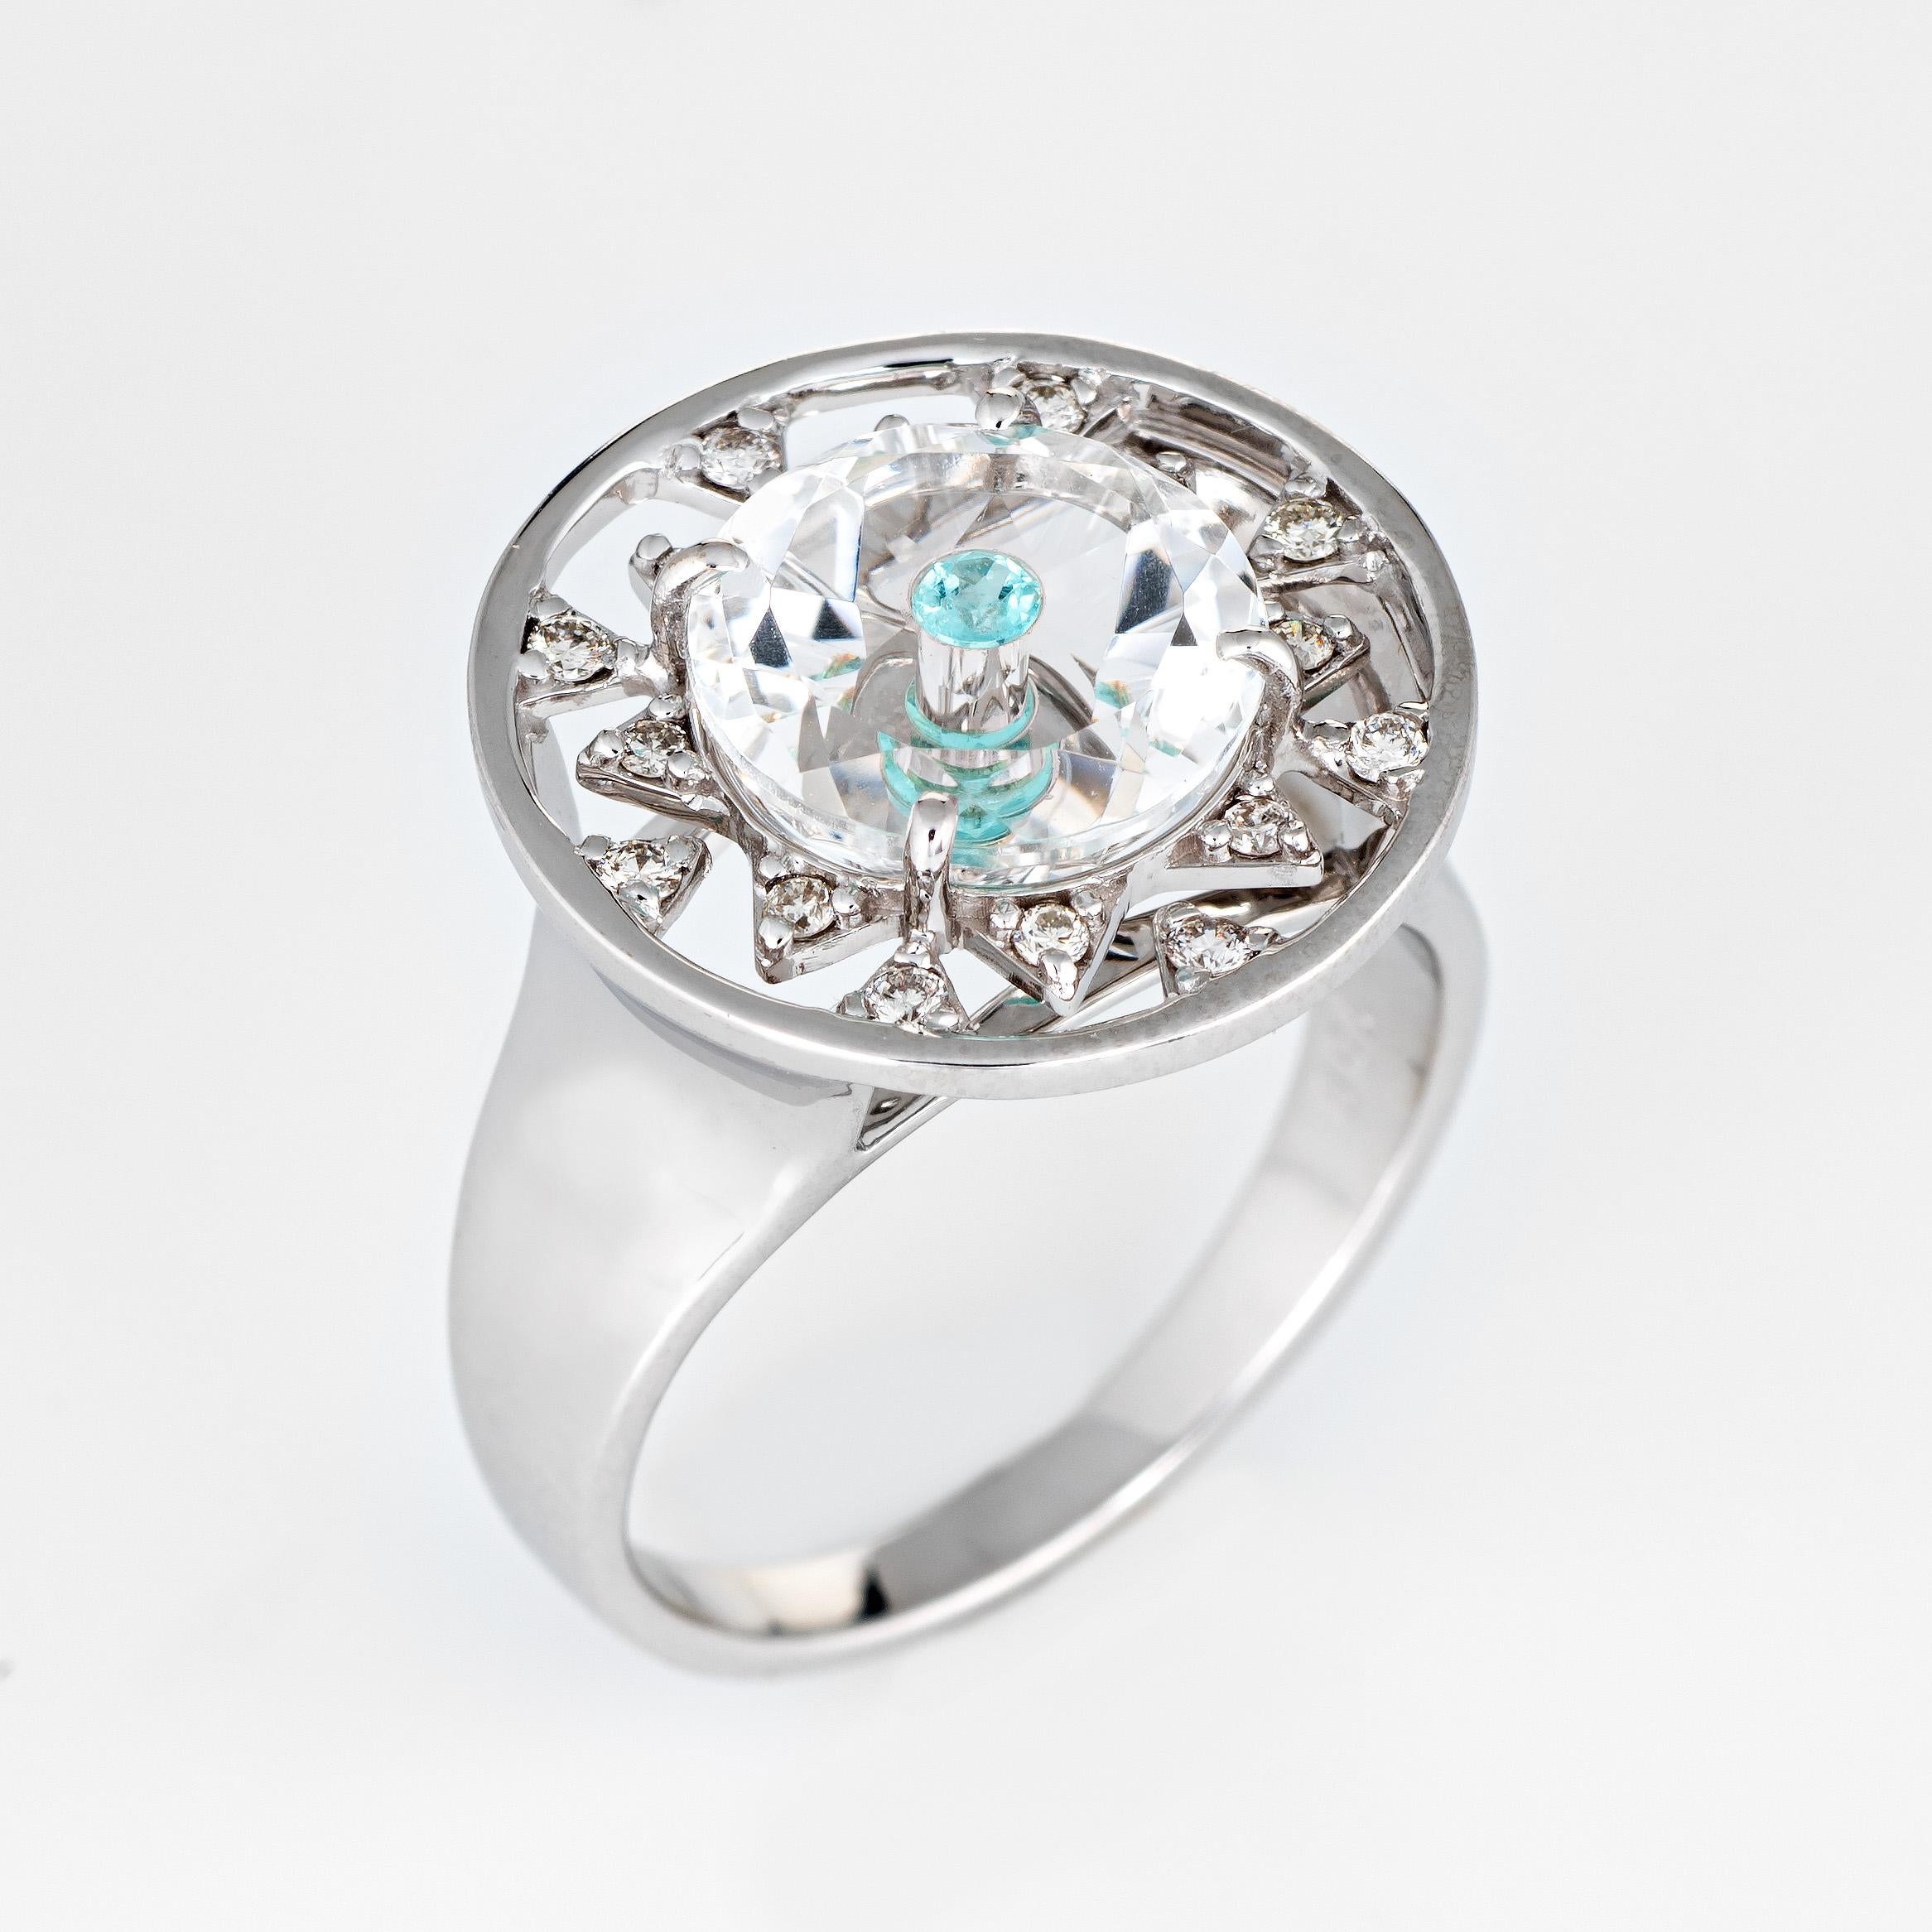 Stylish Vianna Brasil Paraiba & diamond cocktail ring crafted in 18 karat white gold. 

Paraiba tourmaline is estimated at 0.05 carats, accented with an estimated 0.32 carats of diamonds (estimated at H-I color and VS2-SI1 clarity). The tourmaline